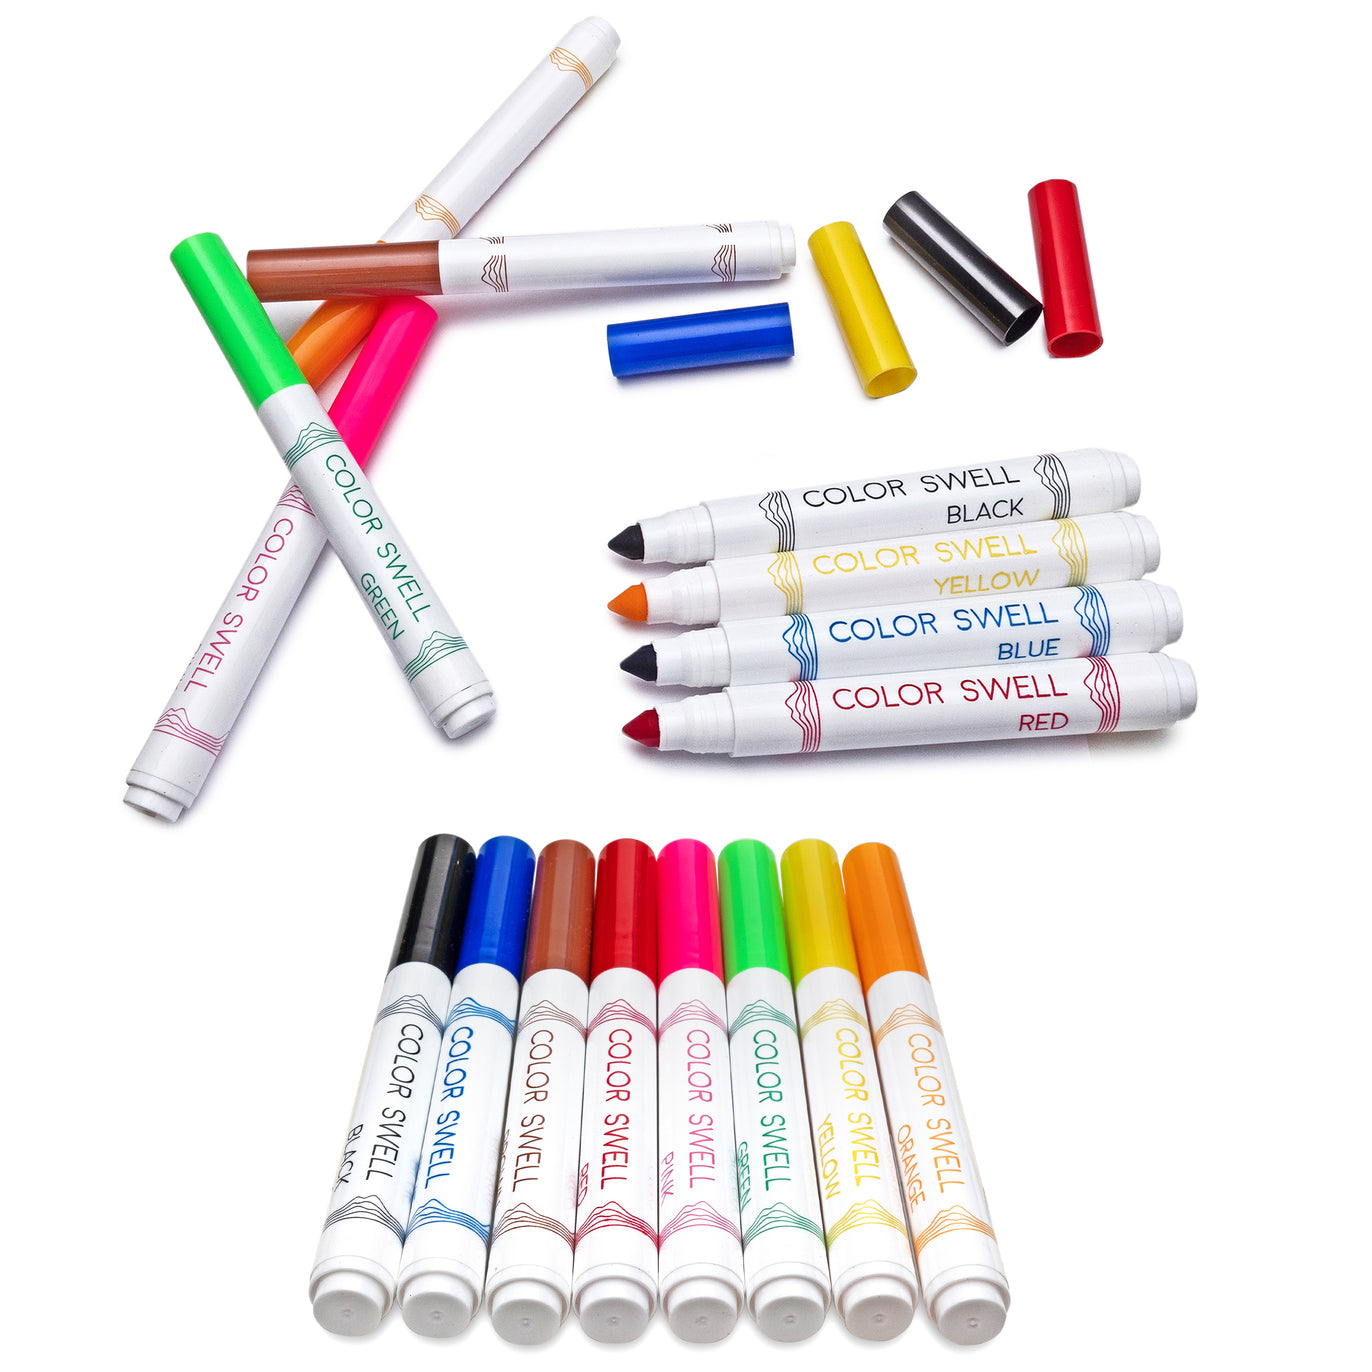 Color Swell Bulk Permanent Markers 60 Count (Black) For, 54% OFF